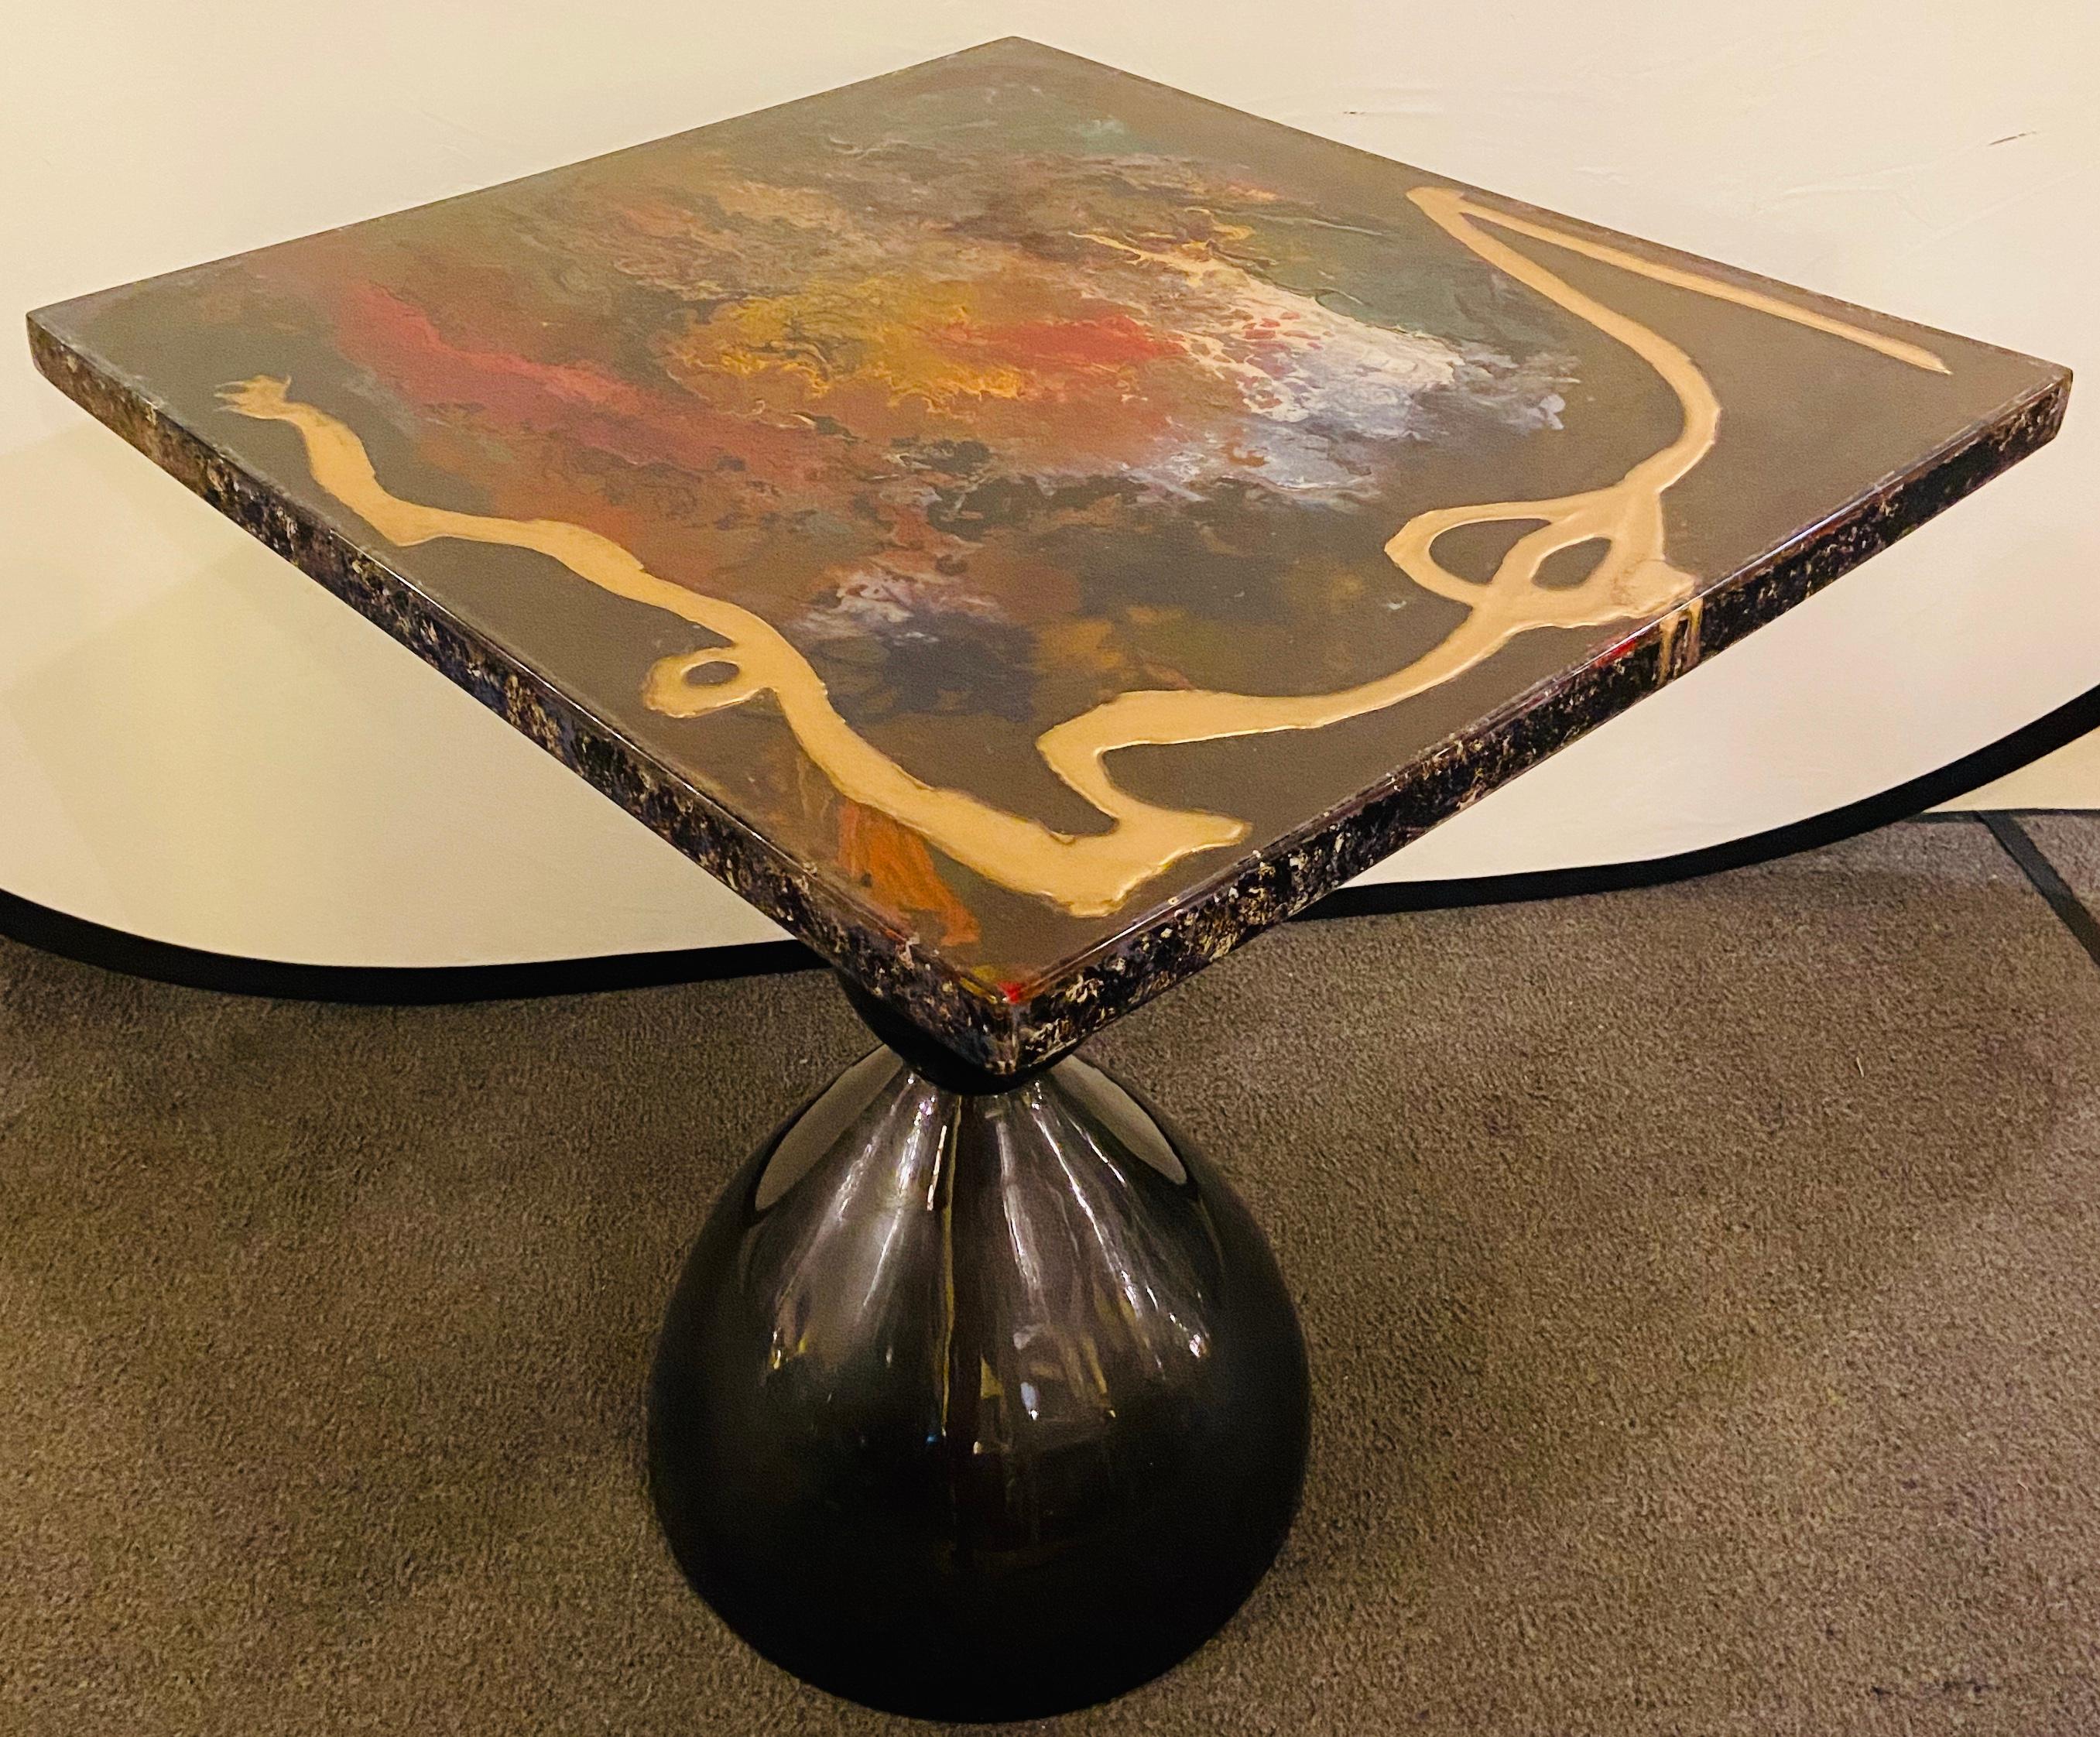 Mid-20th Century Abstract Design Mid-Century Modern Center or End Table in Resin on Black Epoxy